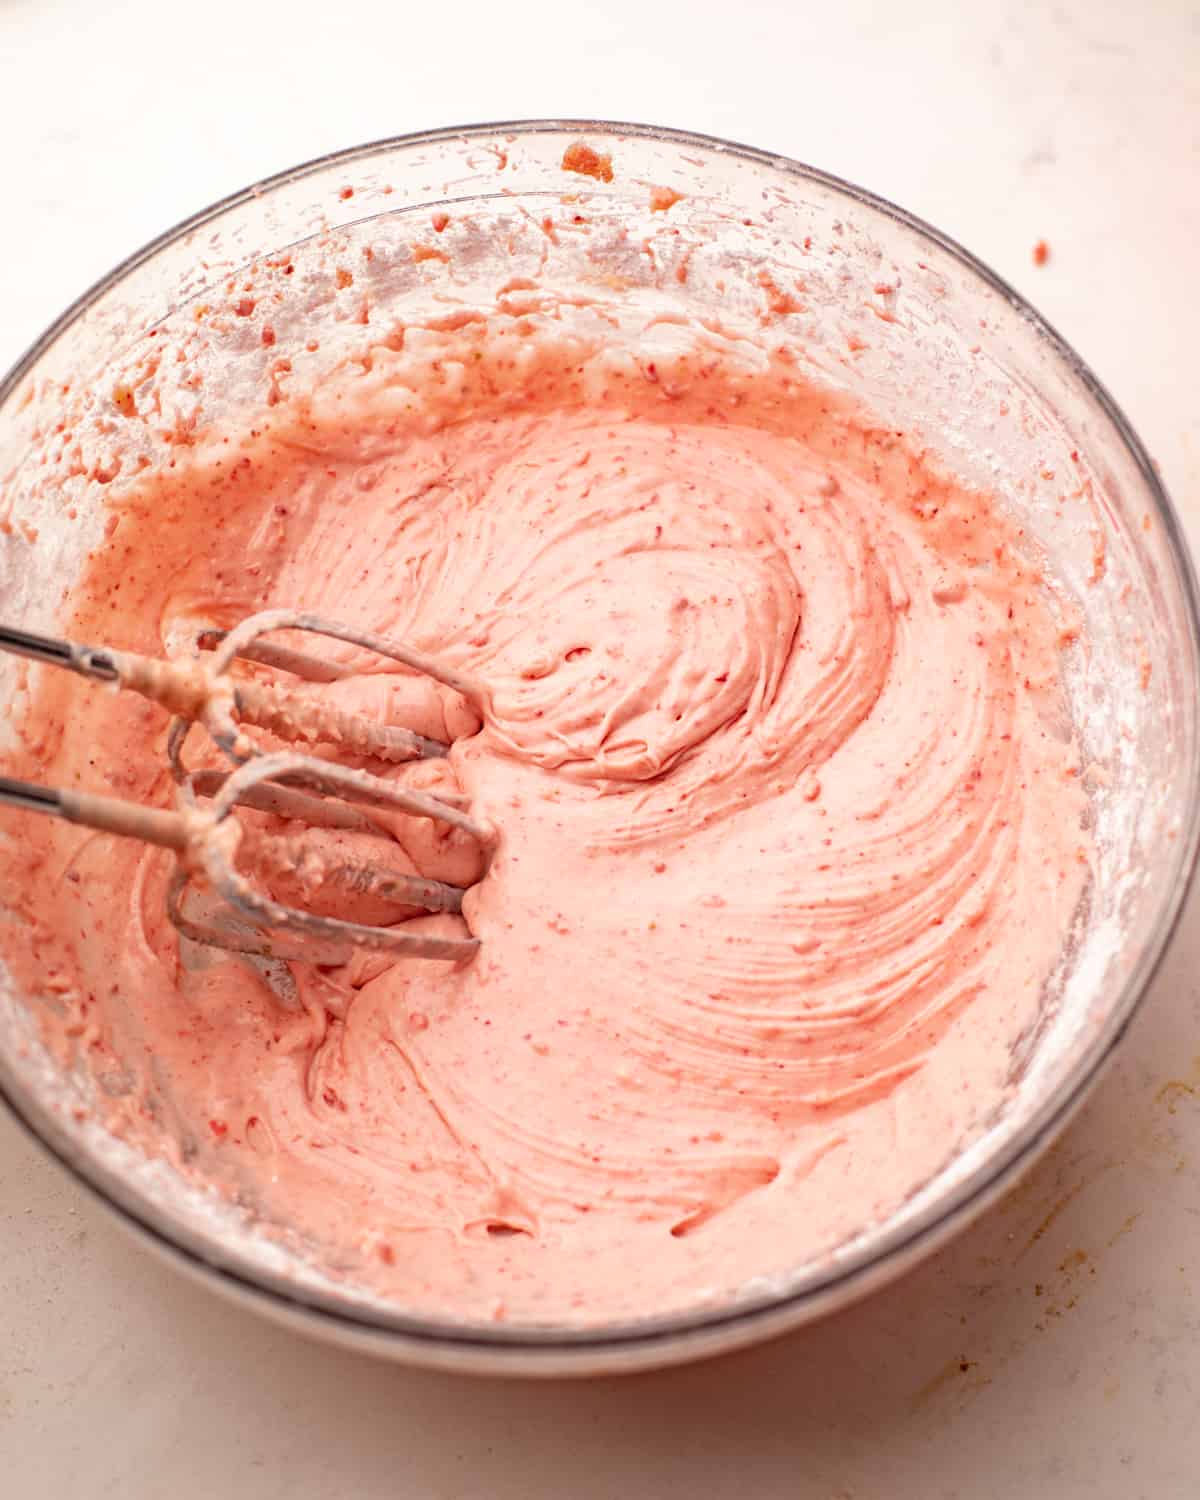 strawberry cream cheese filling mixed together in a large mixing bowl.